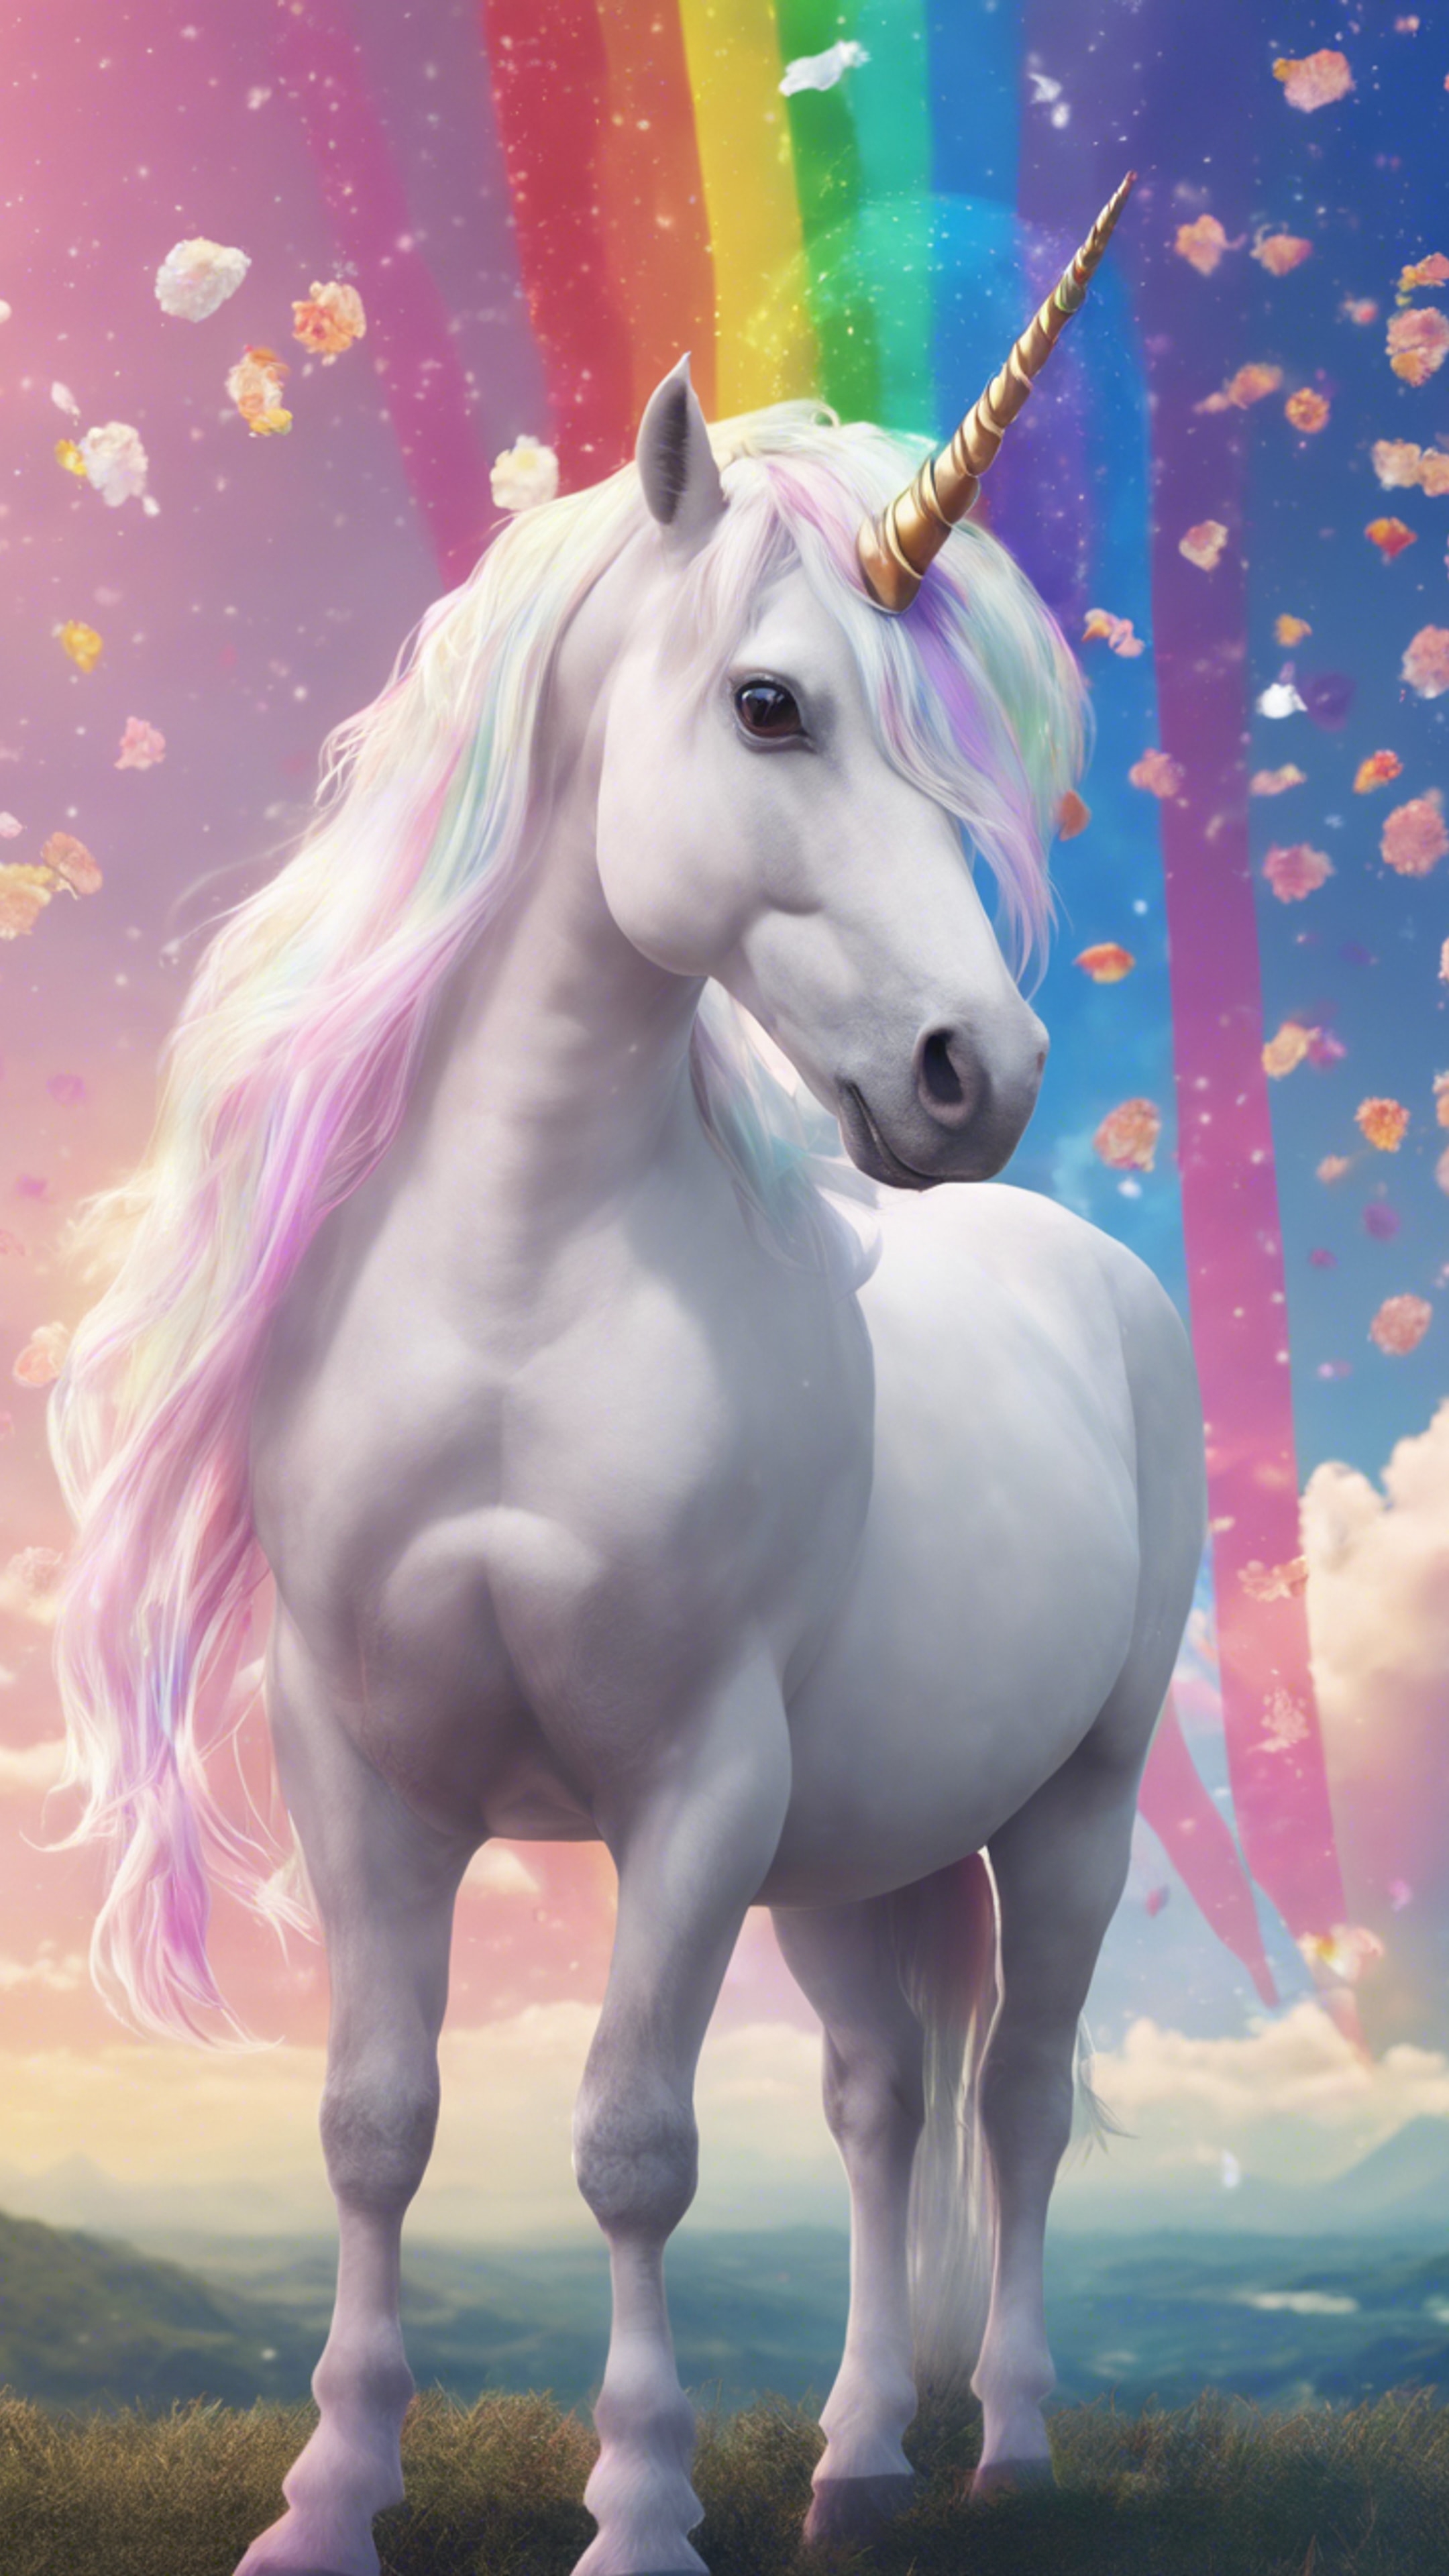 A white unicorn with rainbow-colored mane in a kawaii styled anime background. 벽지[3fcd035c52a54abd9a77]